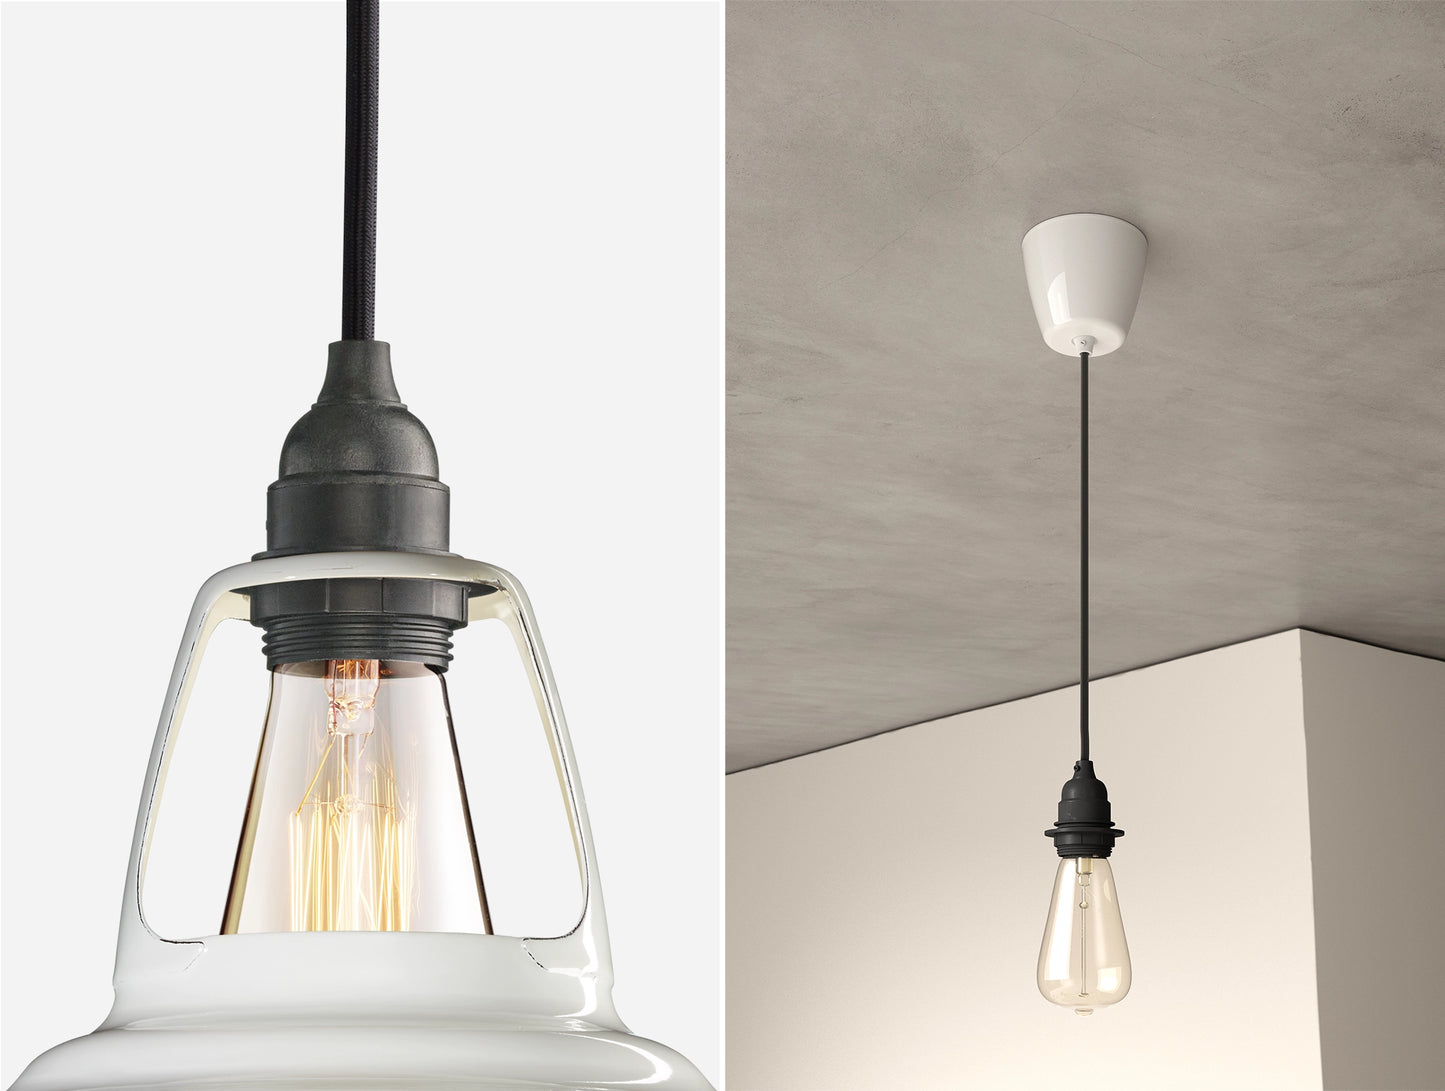 Close up of an E27 Industrial suspension set on a Original White lampshade on the left. On the right, an E27 Industrial pendant set with a lightbulb is hanging from the ceiling